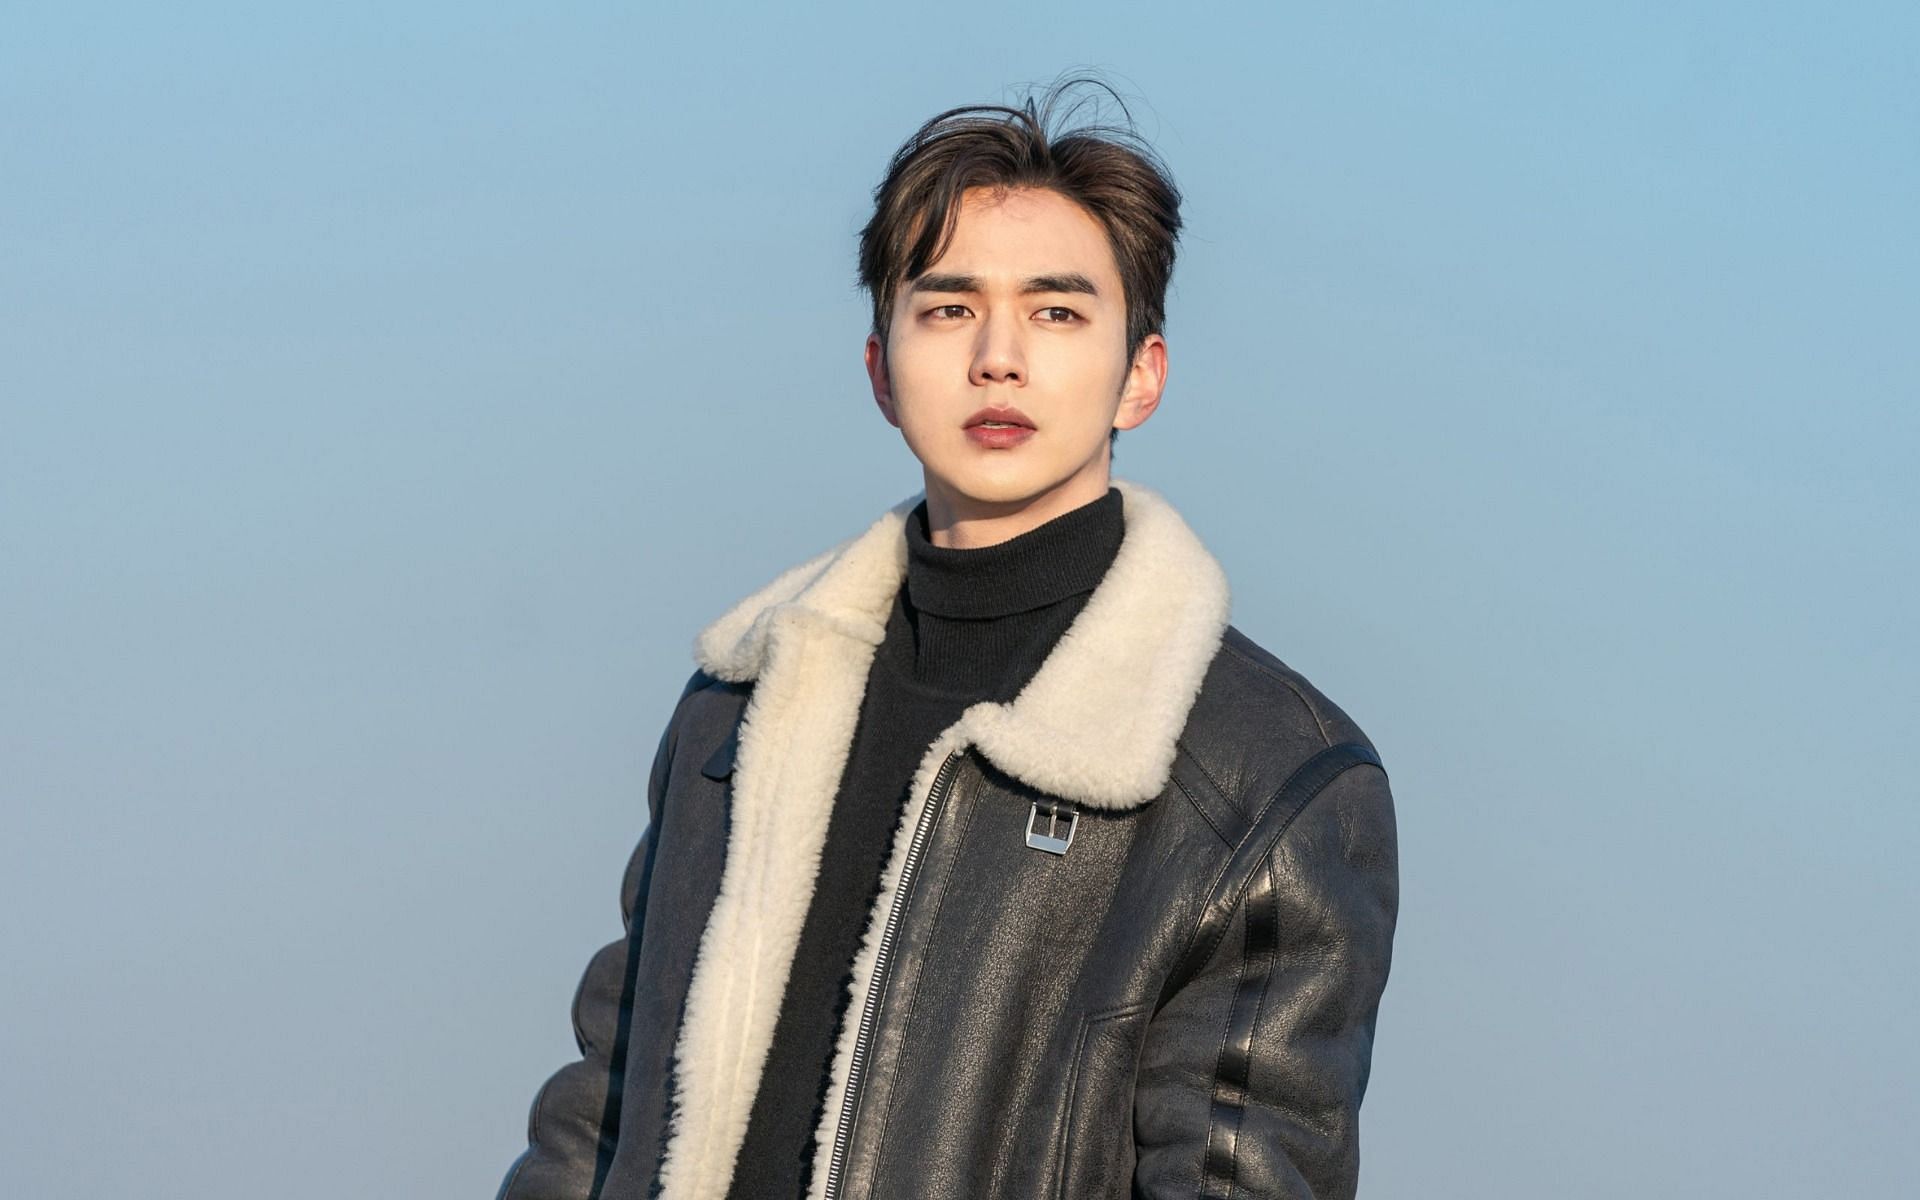 Actor Yoo Seung-ho greeted with sympathy after his recent weight loss (Image via Twitter)